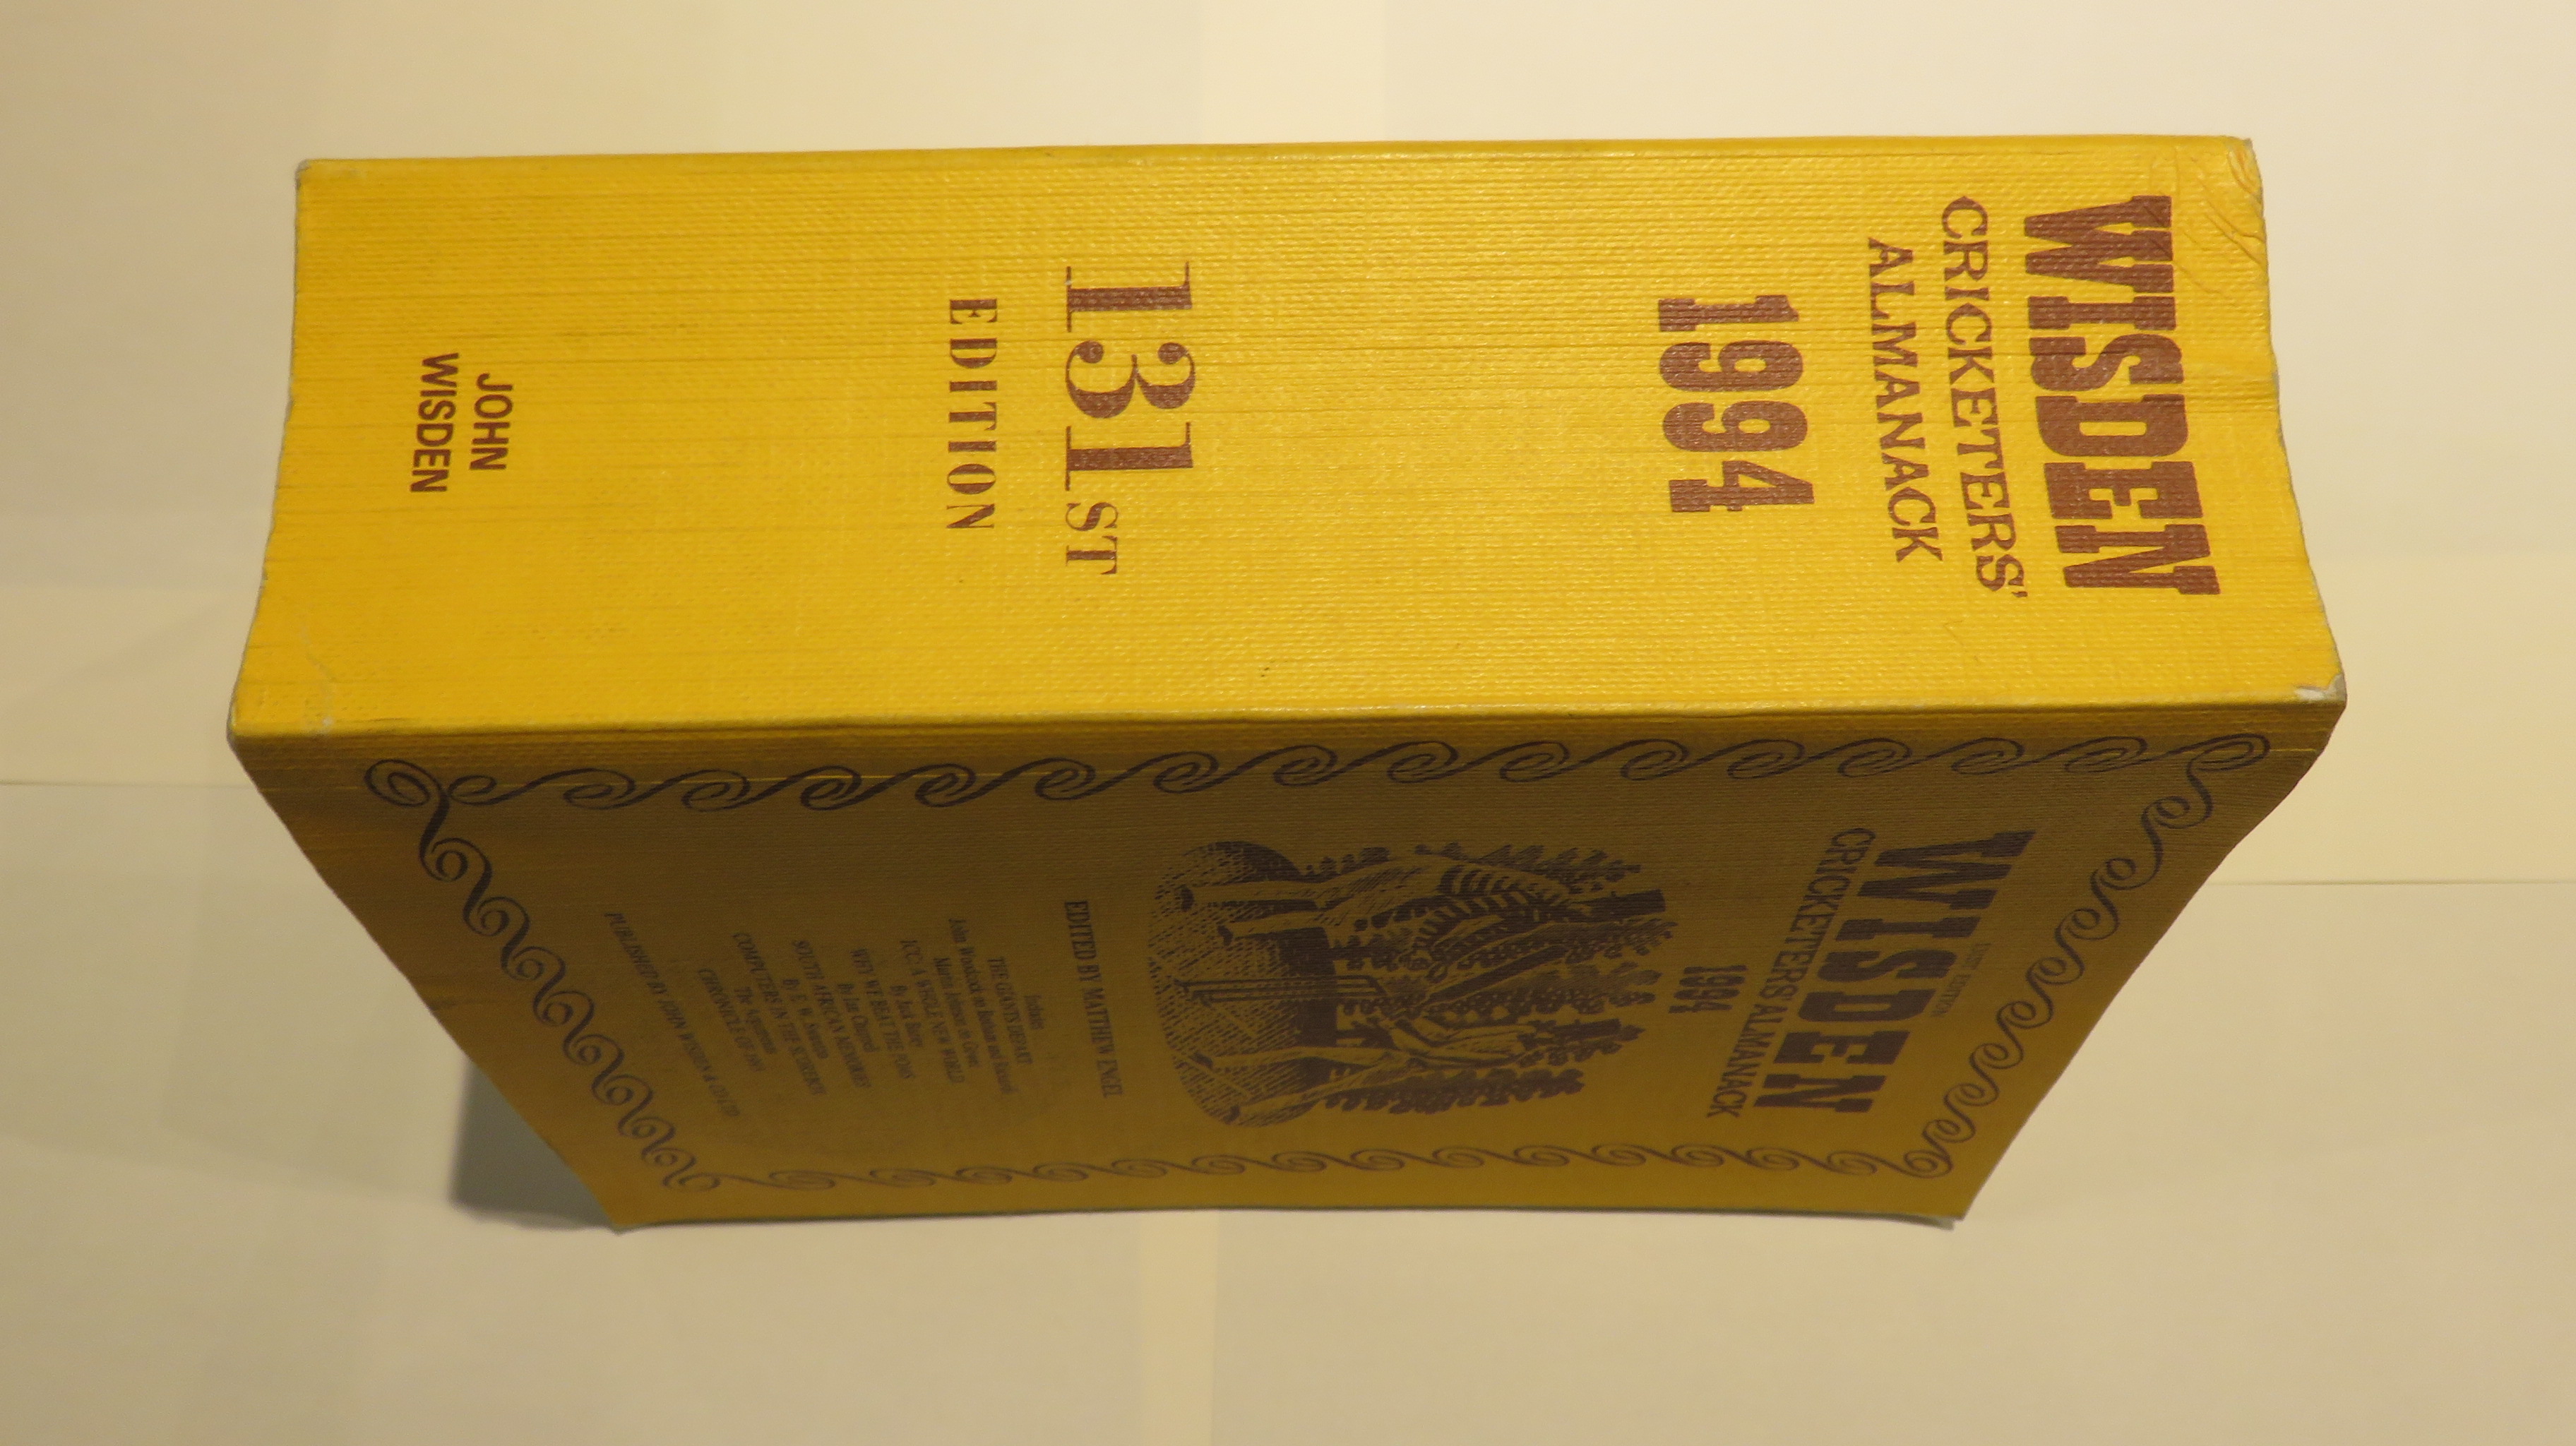 Wisden Cricketers' Almanack for the year 1994